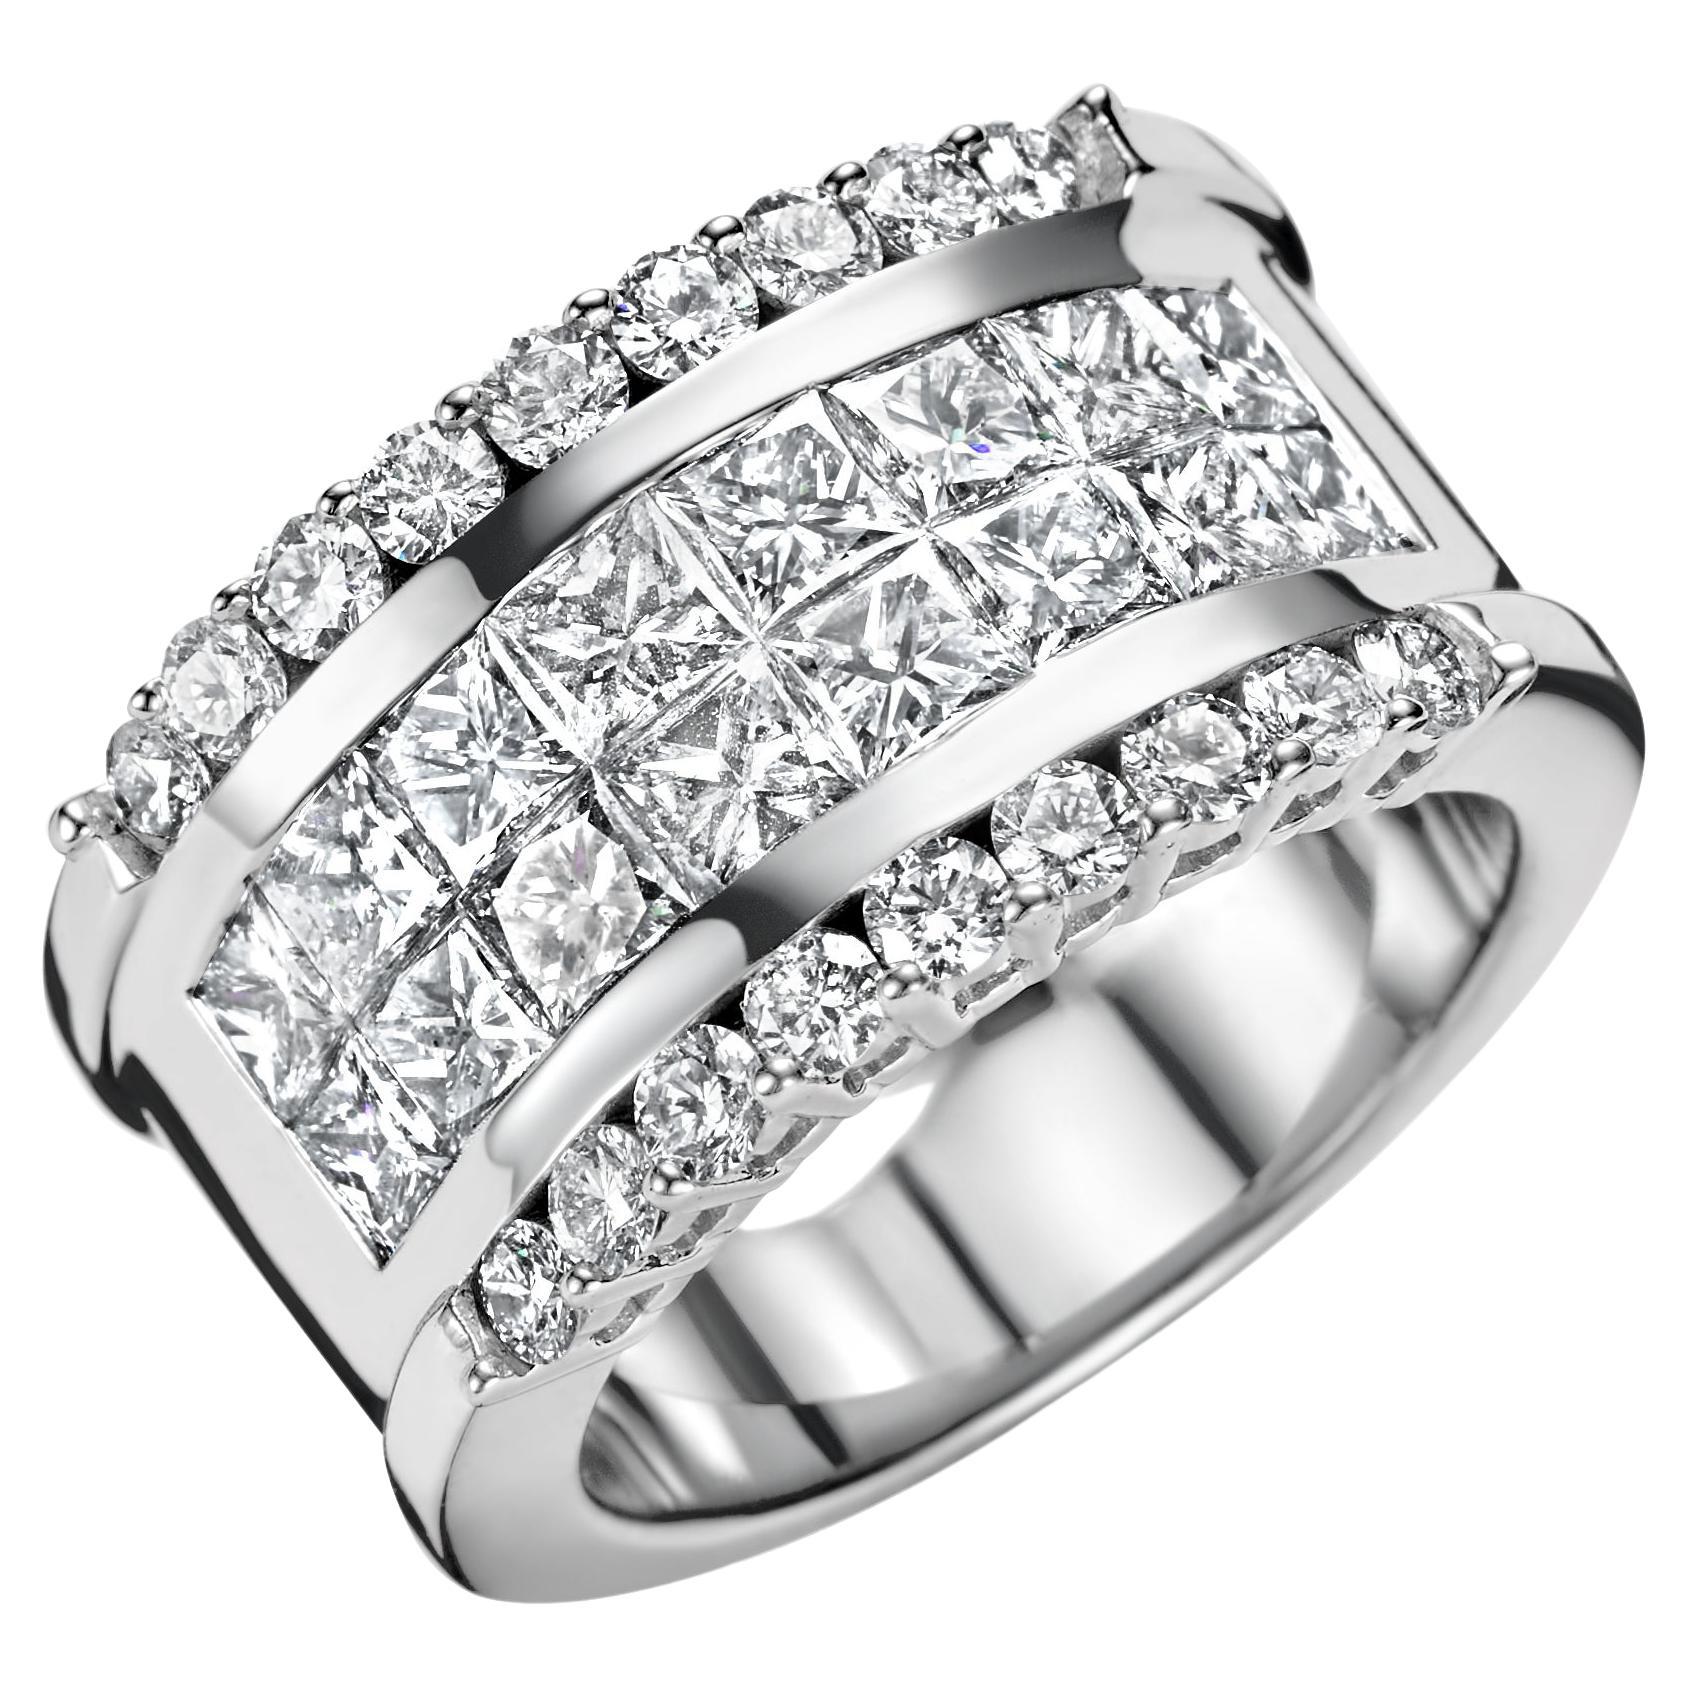 18kt White Gold Ring With 2.5 ct Princess cut & 1 ct Brilliant cut Diamond